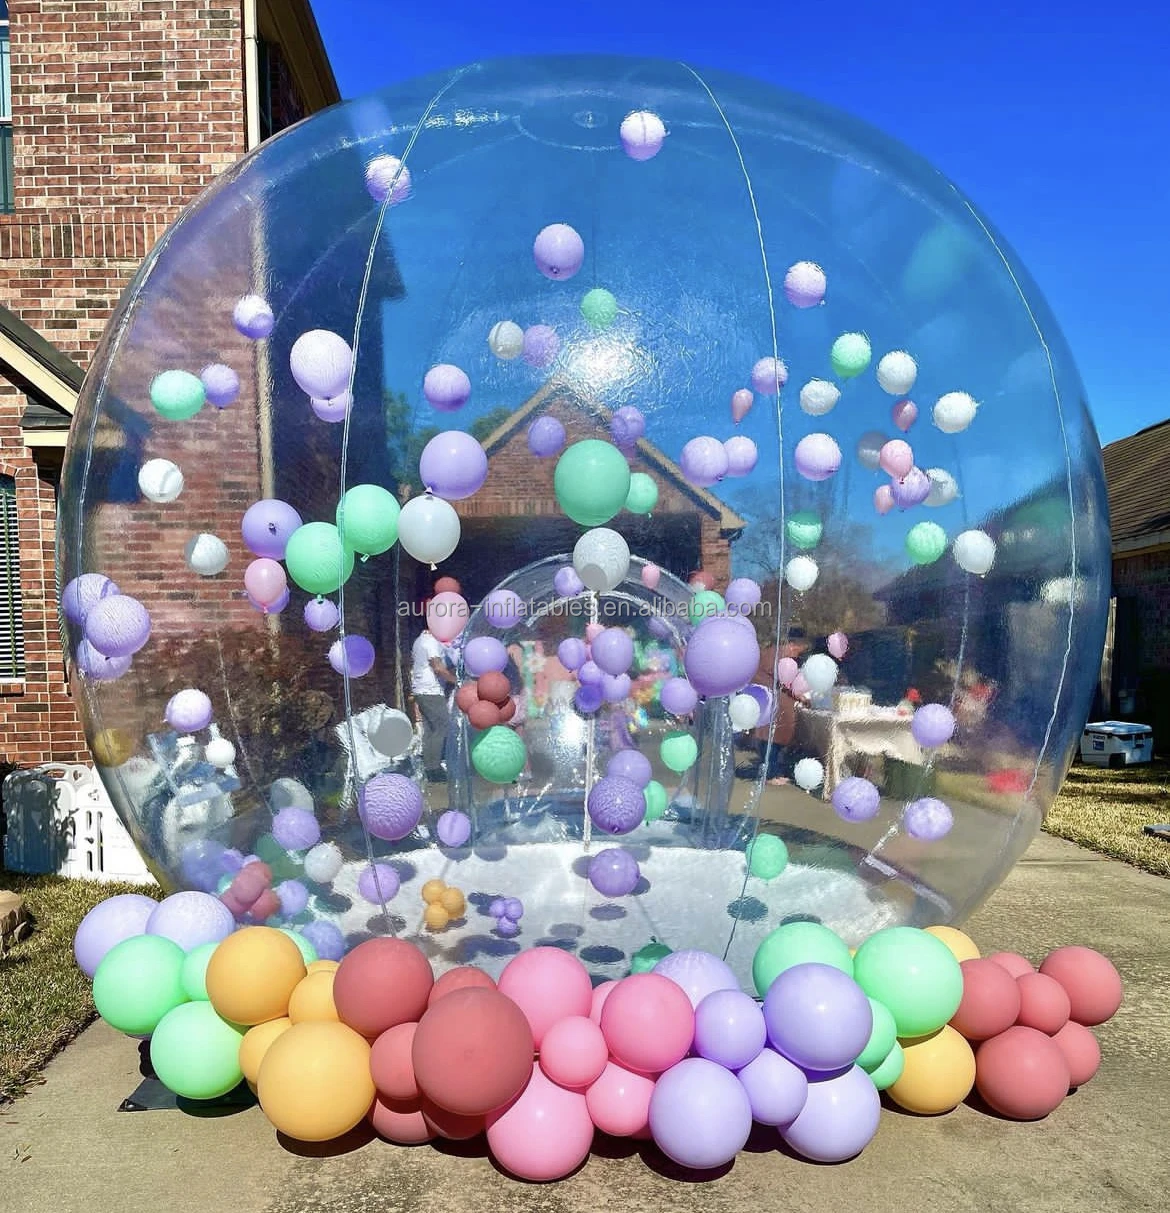 Outdoor Wholesale balloon party ideas commercial transparent dome tent inflatable bubble balloons house